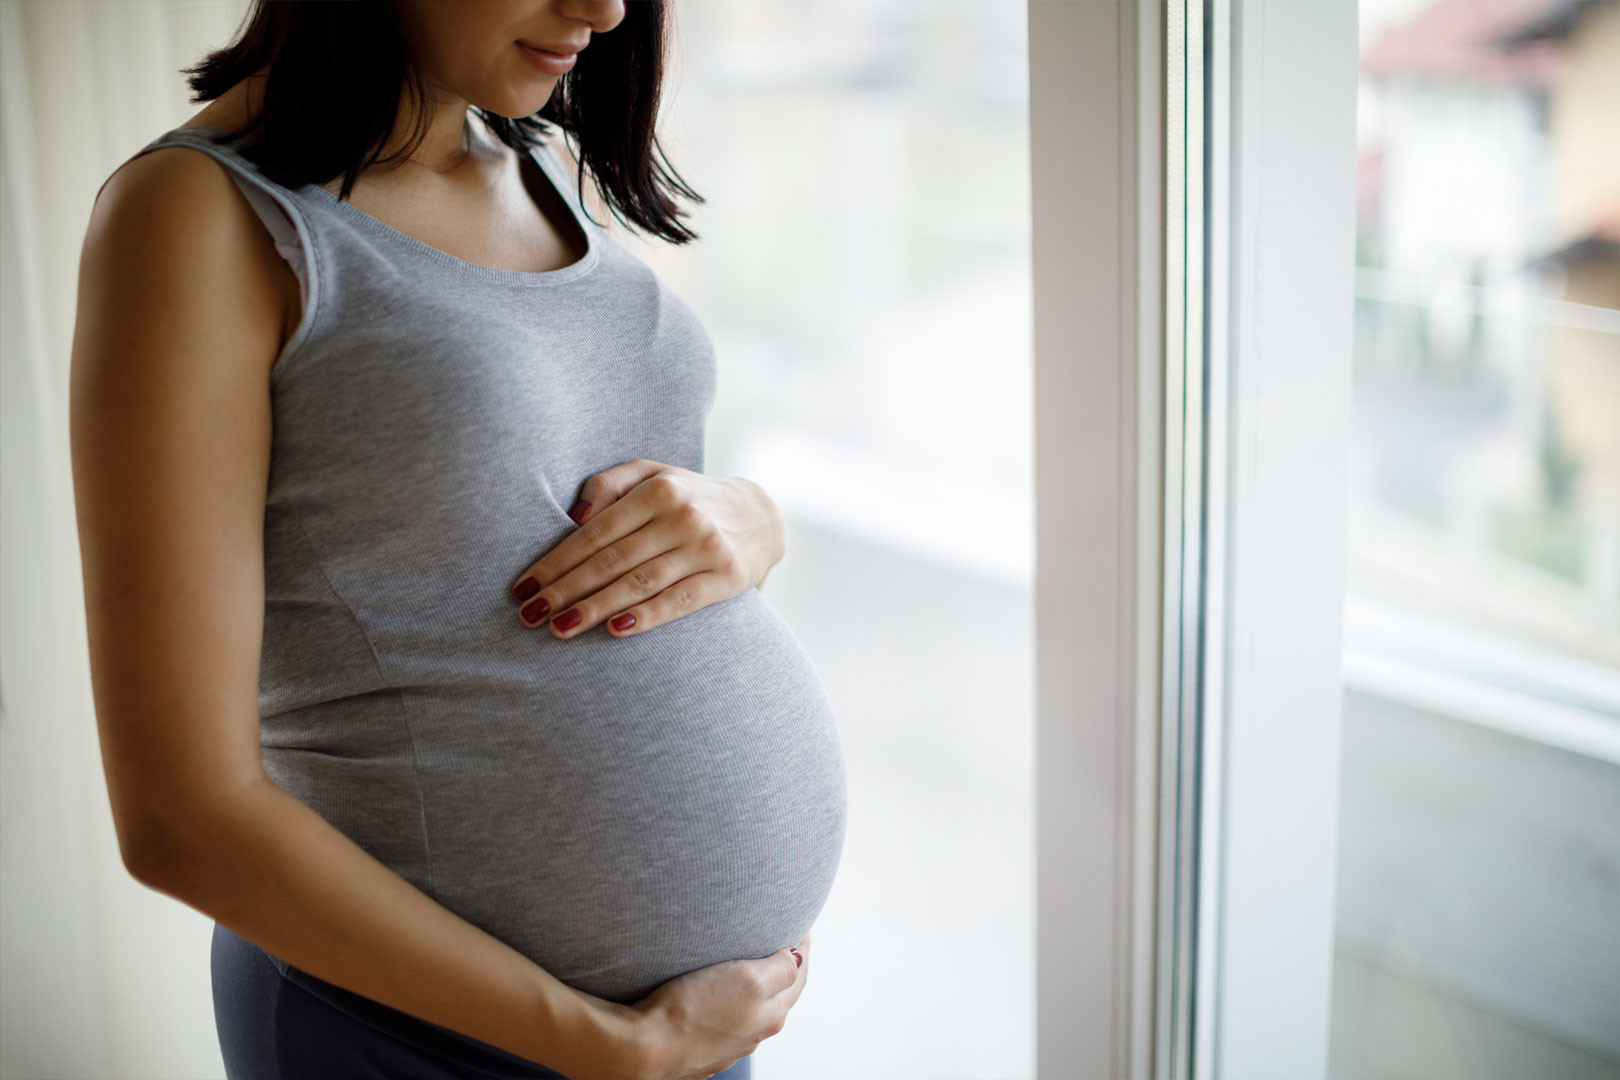 6 Useful Tips to Get Rid of Pregnancy Gas